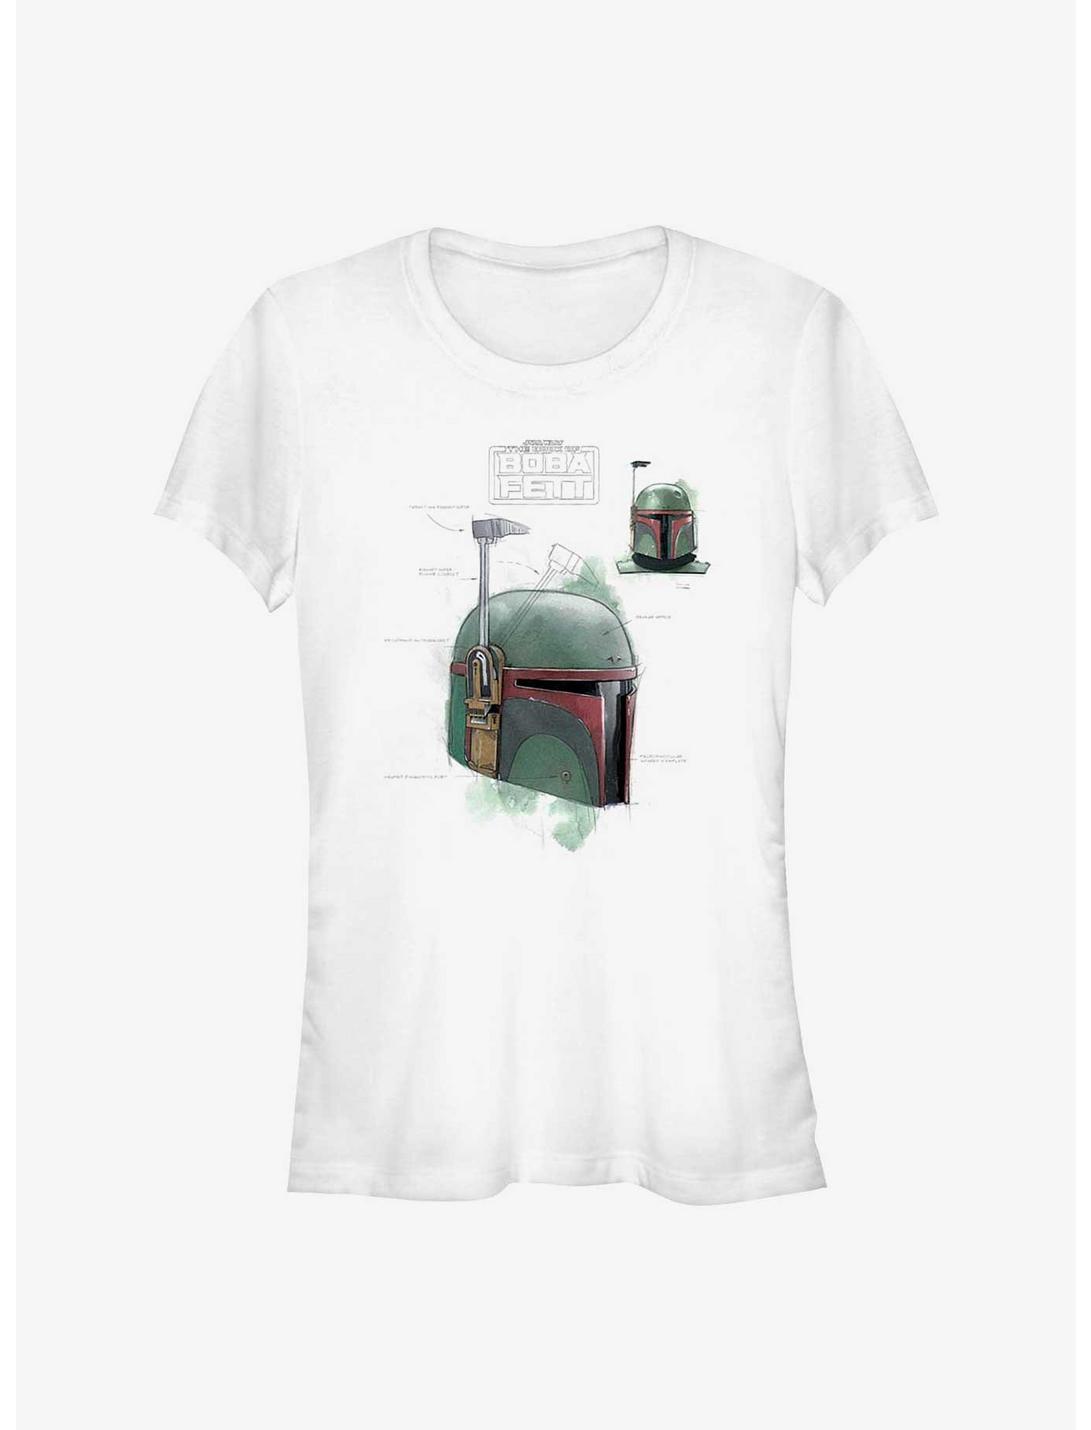 Star Wars The Book Of Boba Fett Helmet Schematic Painted Girls T-Shirt, WHITE, hi-res